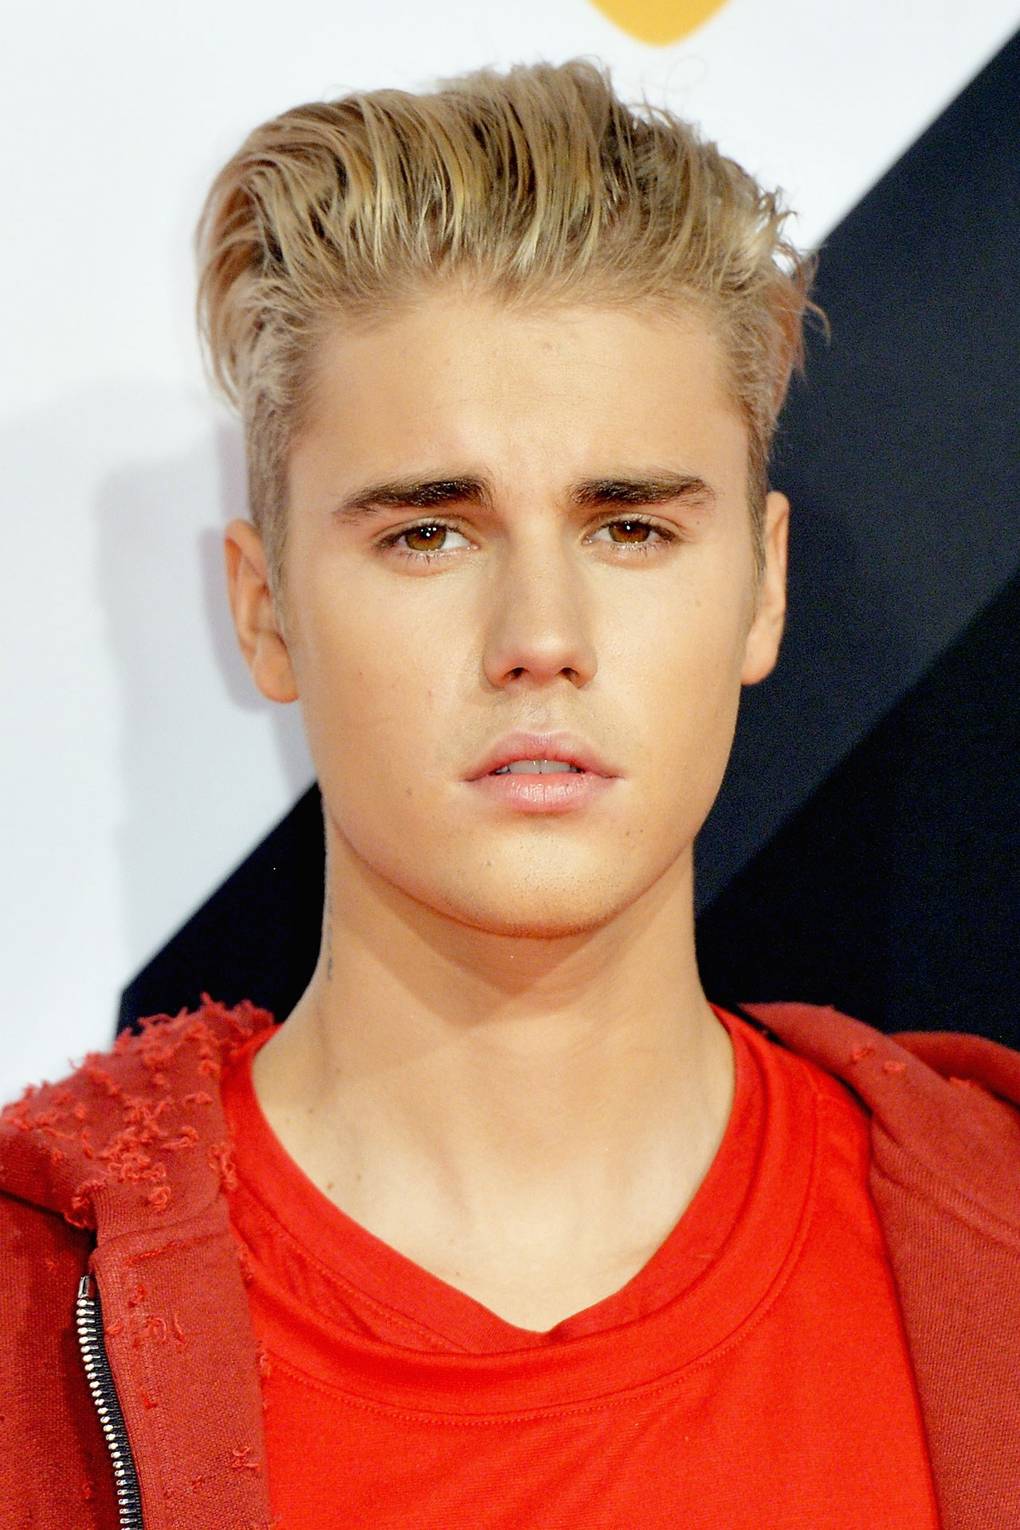 justin bieber's best hairstyles - hair styles over the years